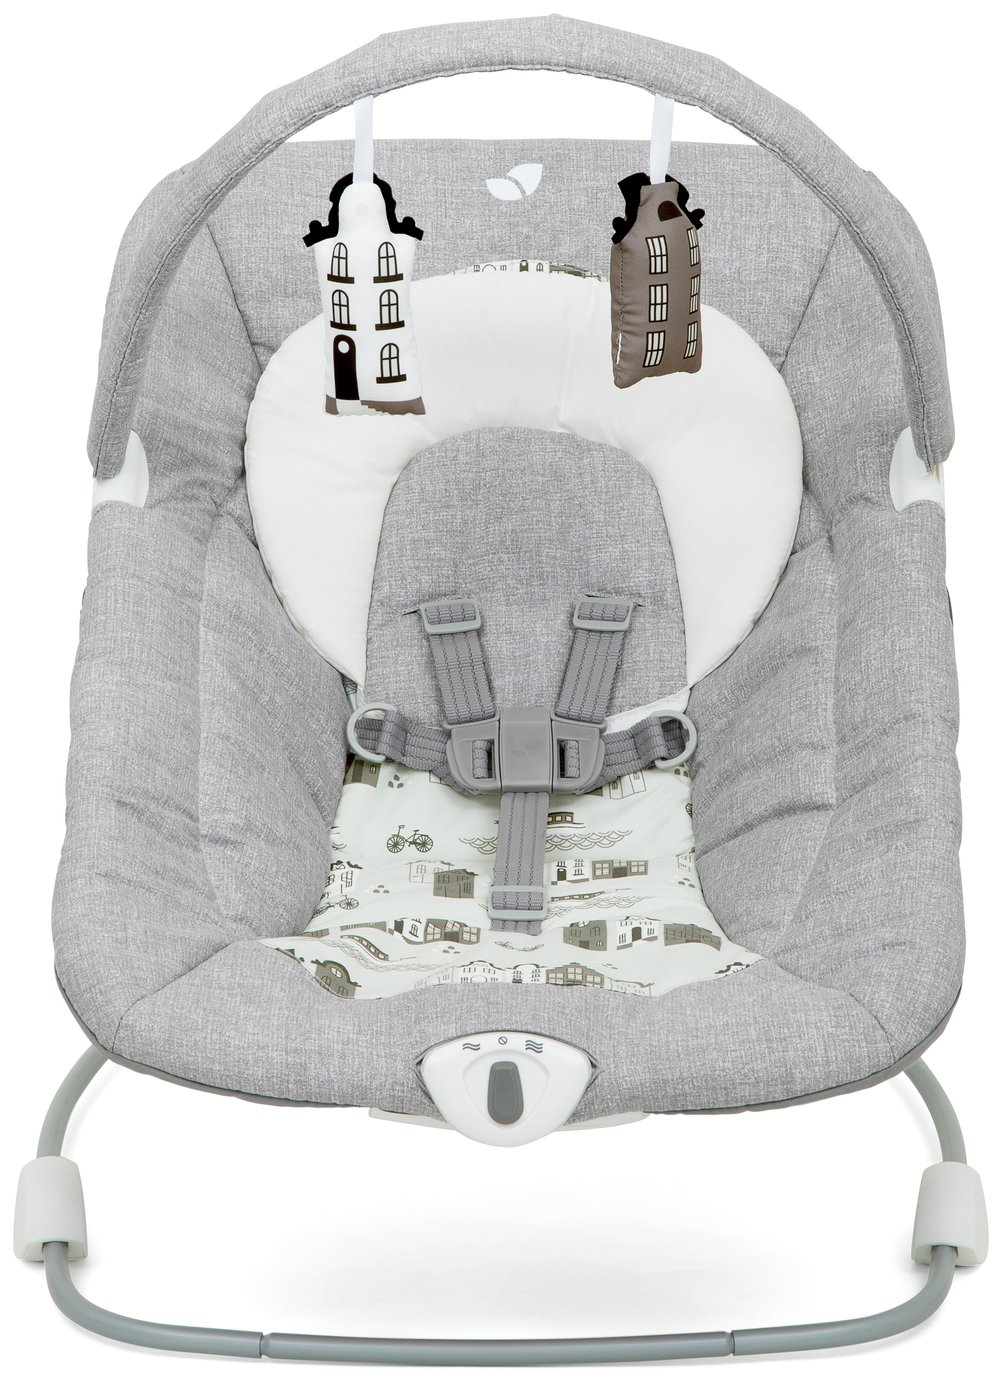 Joie Wish Bouncer Review